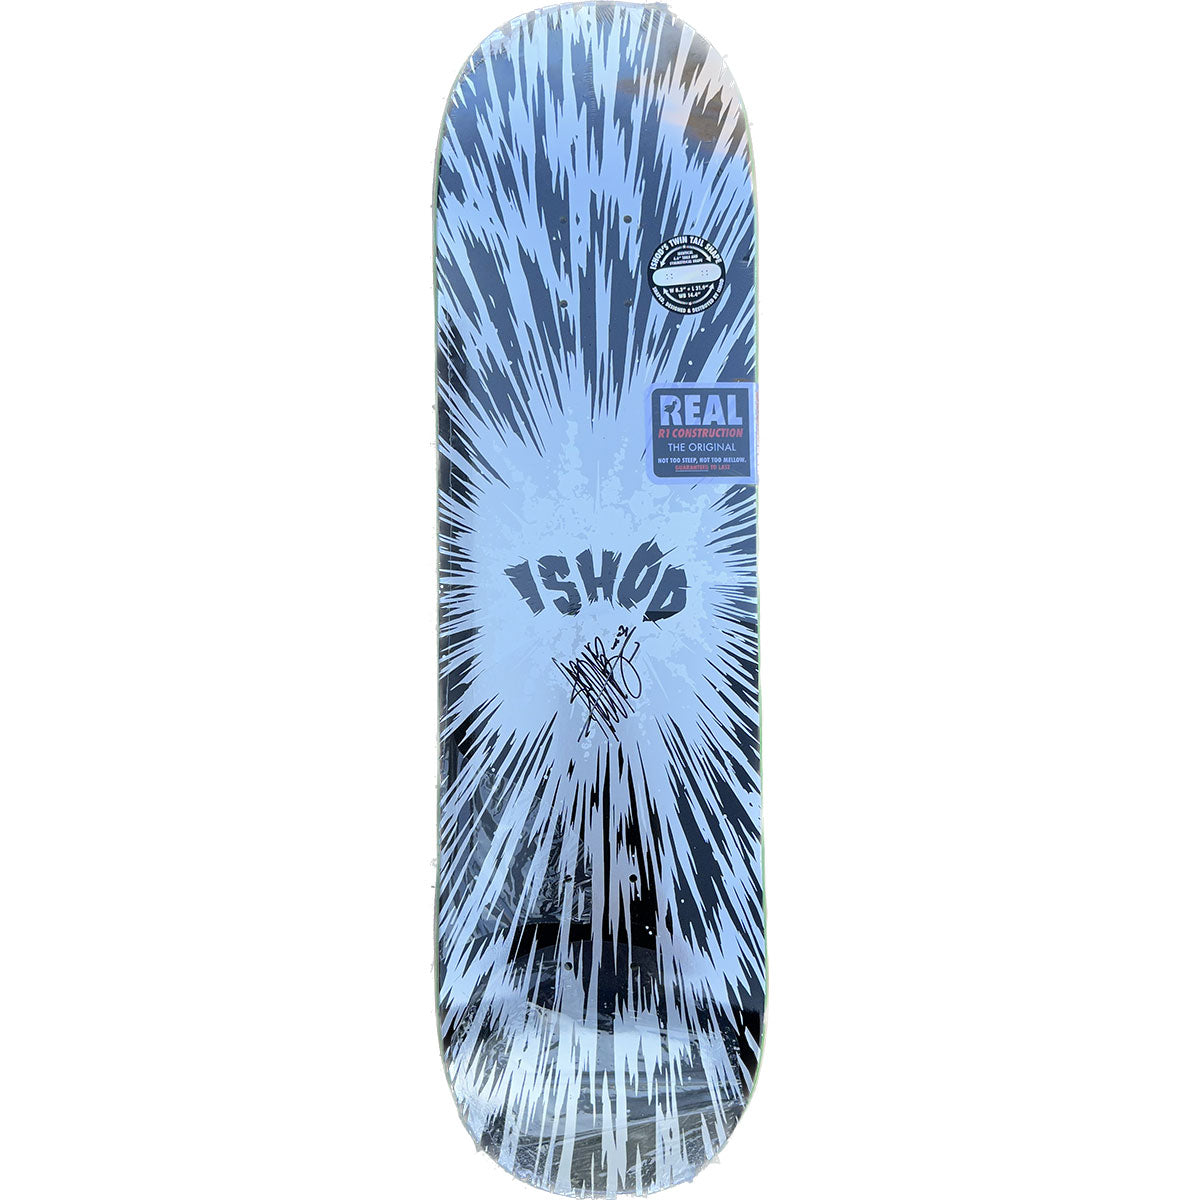 Real Skateboards - DETONATE Twin-Tail - Exclusive, Signed – Ishod Wair